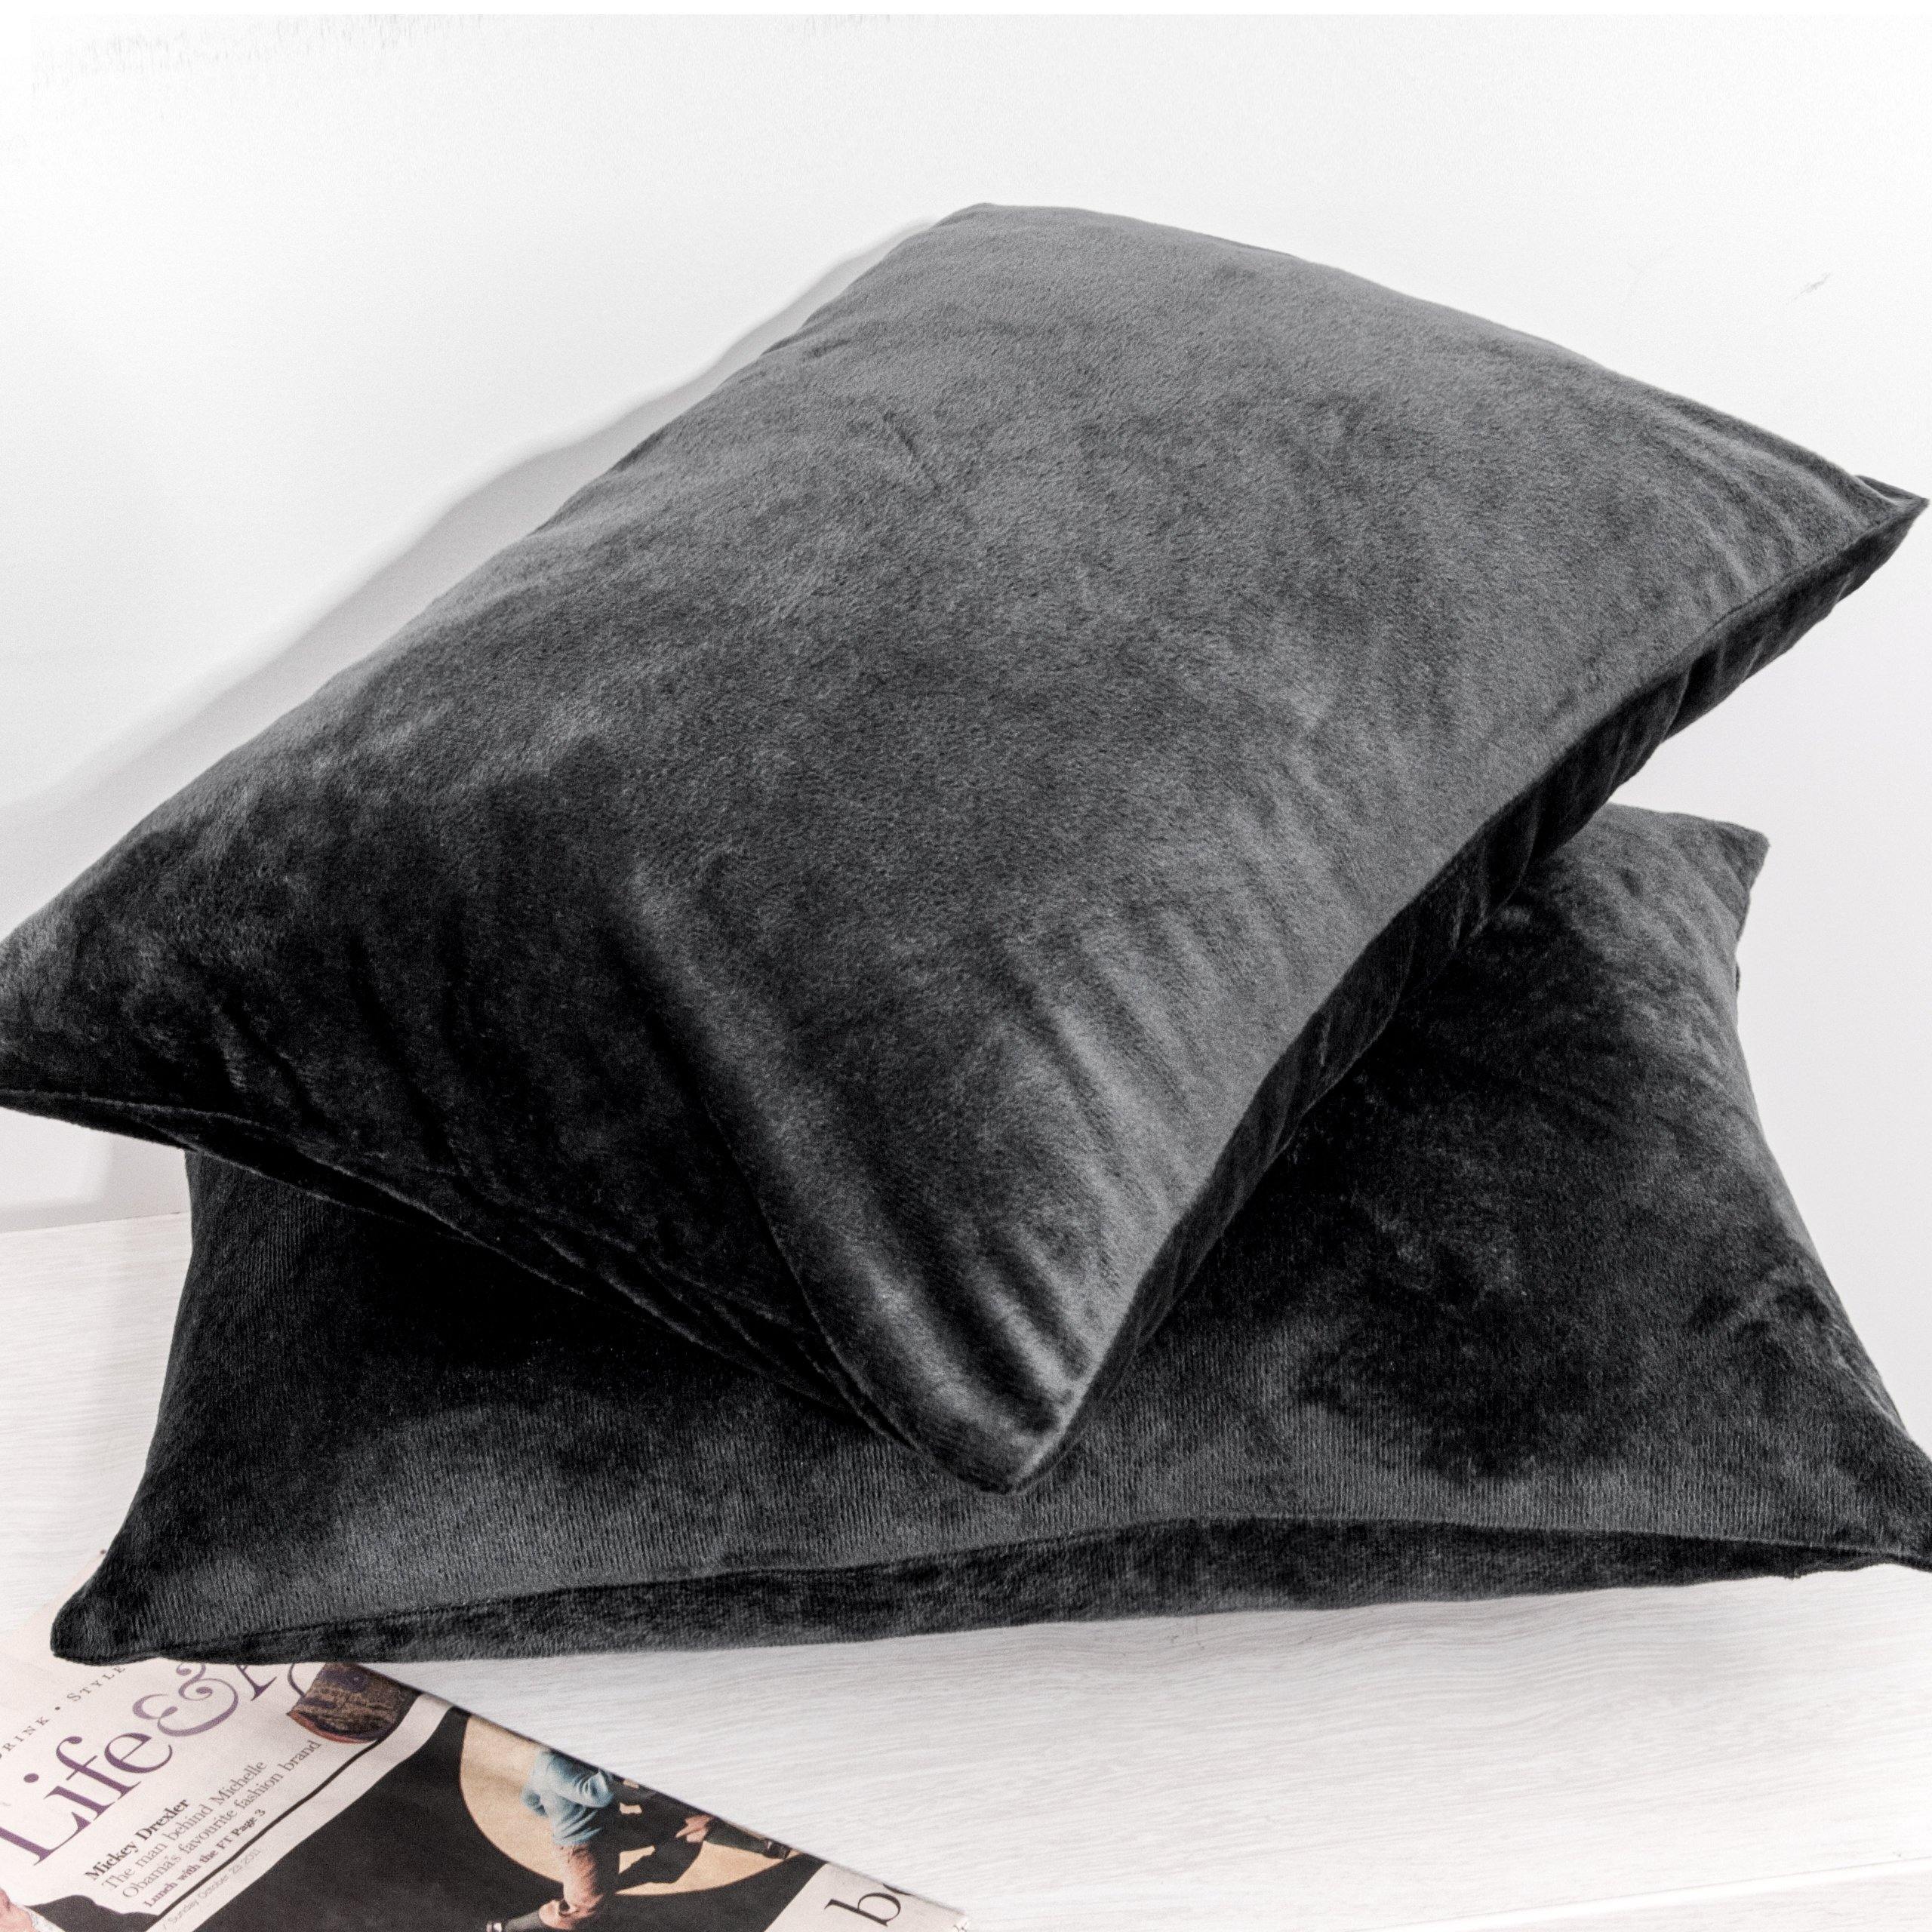 Wekity Pack Of 2 Velvet Soft Solid Decorative Throw Pillow Cover